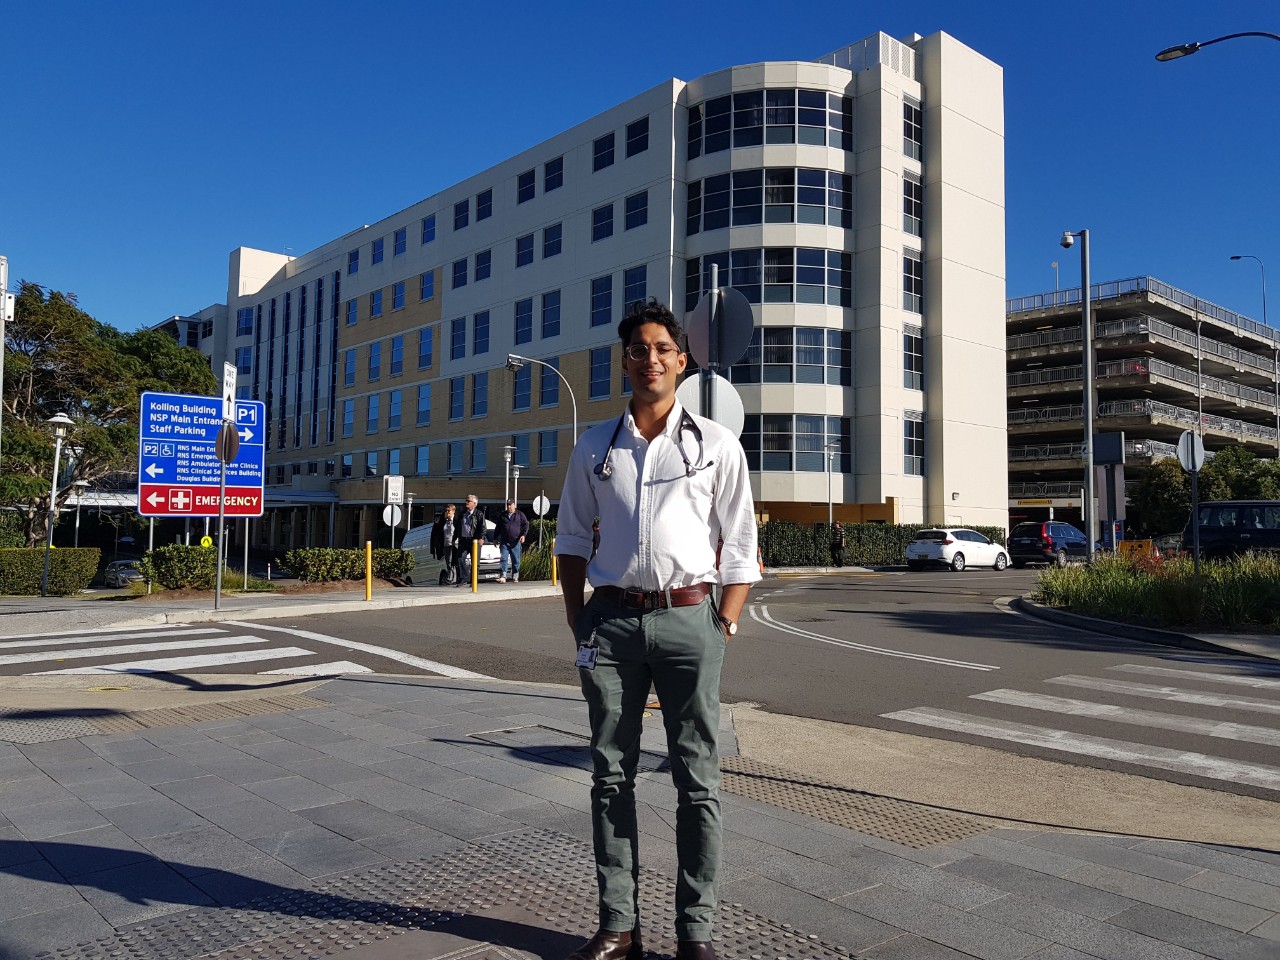 Gurtej standing outside Royal North Shore Hospital, where he is currently studying a Doctor of Medicine